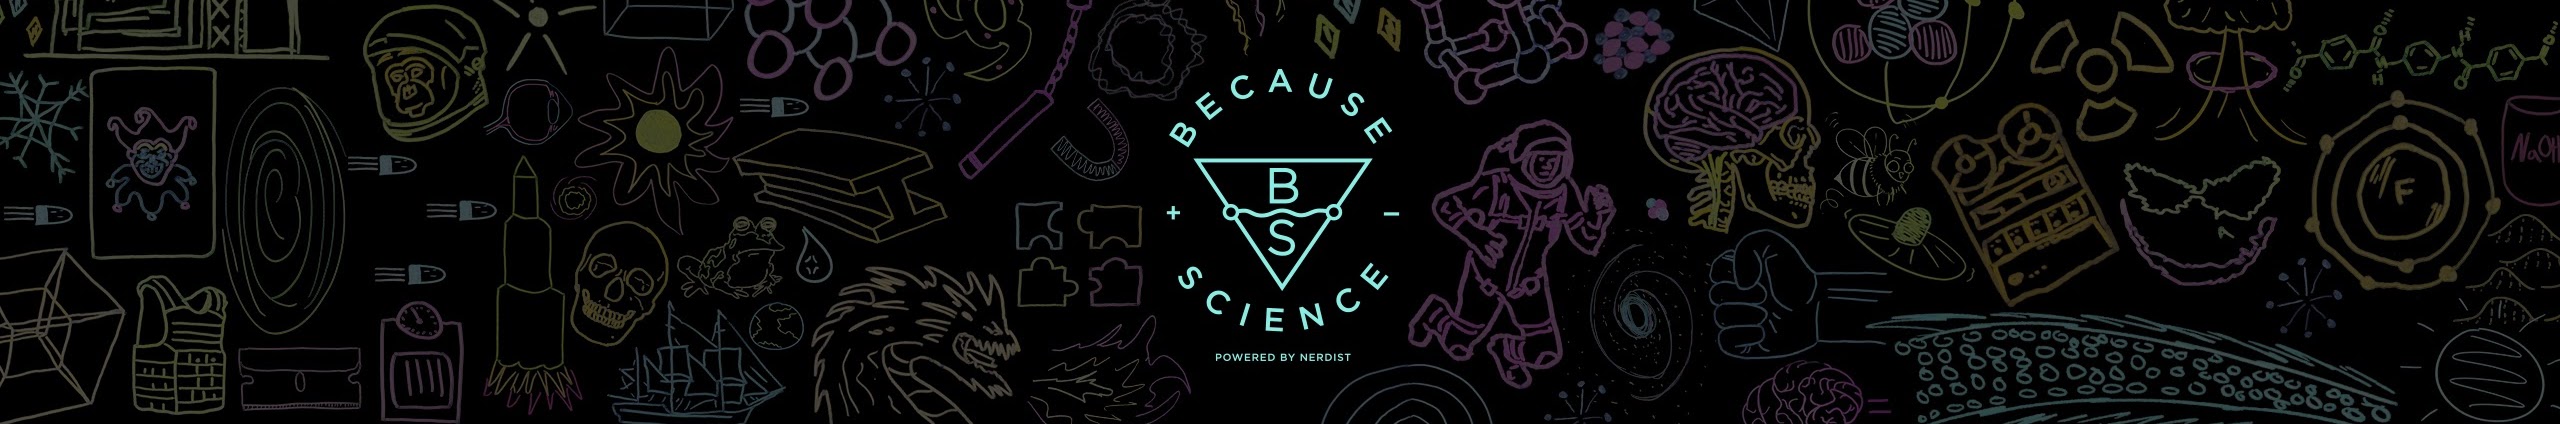 Because Science banner